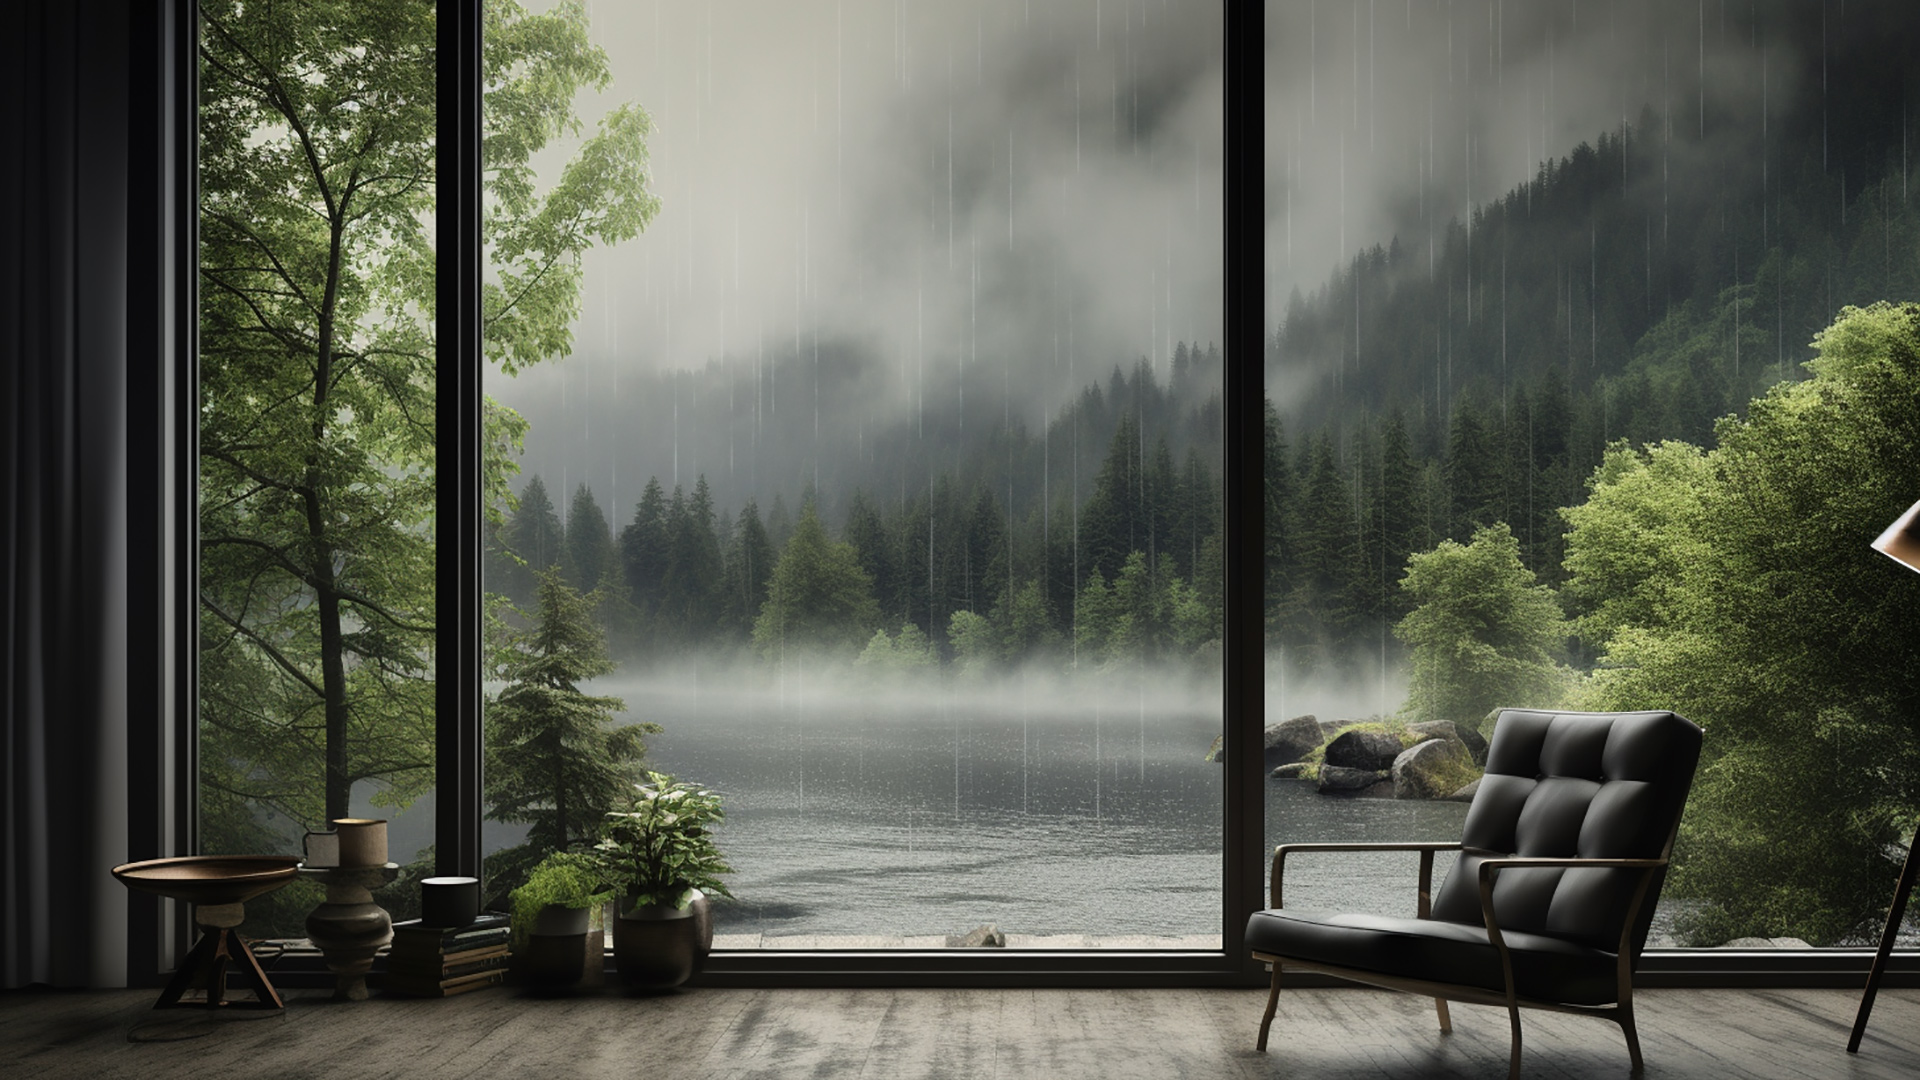 Rainy Day Moods - 4K Wallpaper with Window View